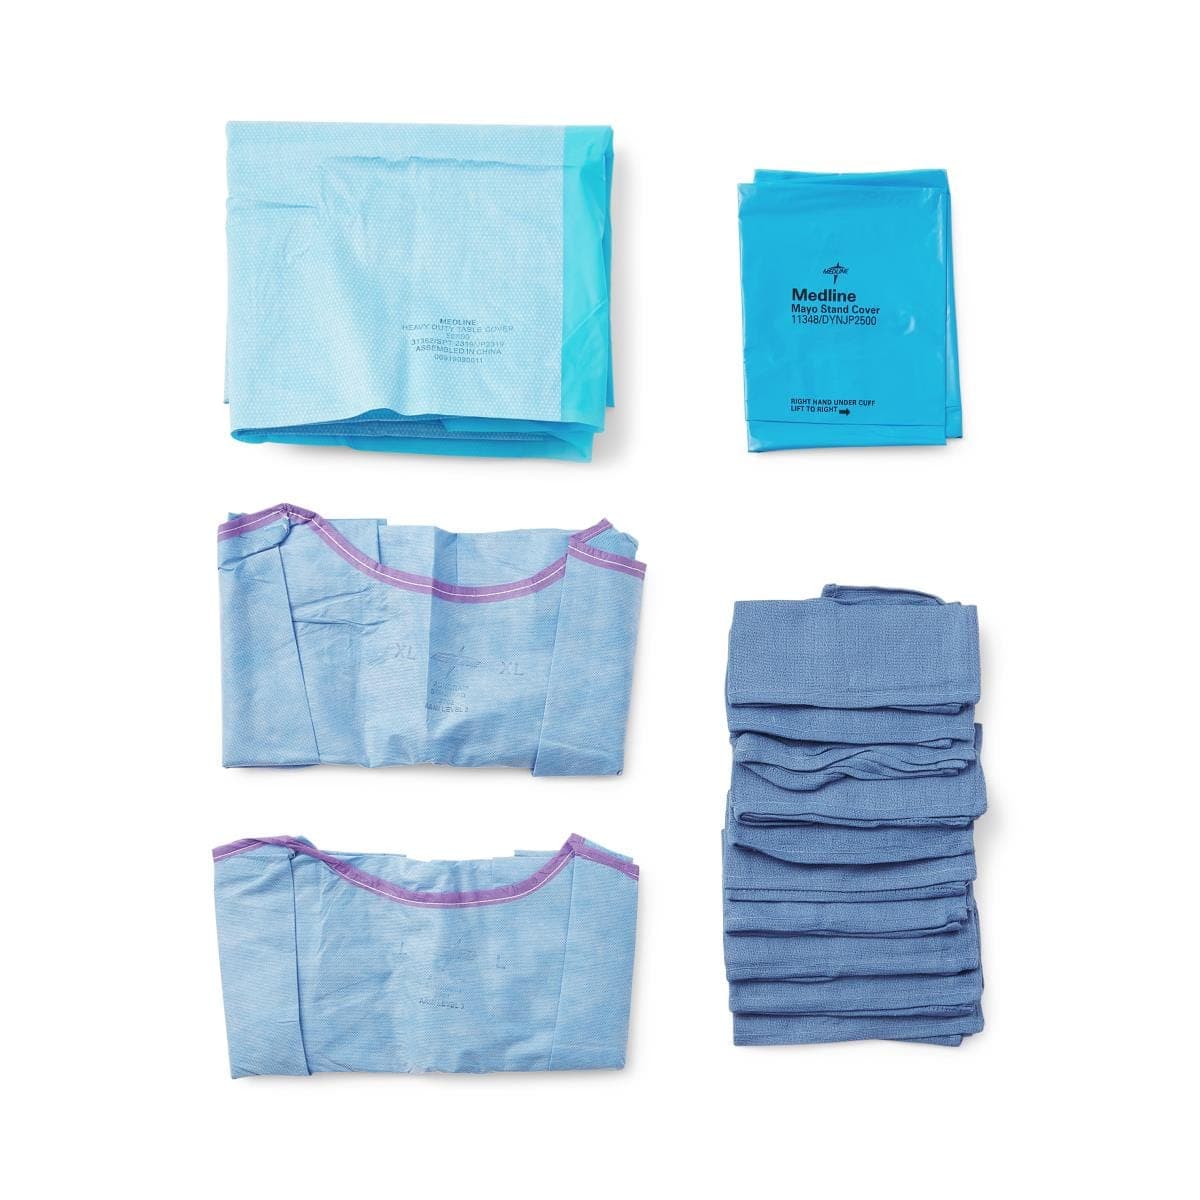 Medline Medline Aurora Surgical Set-Up Pack with Drapes and Gowns